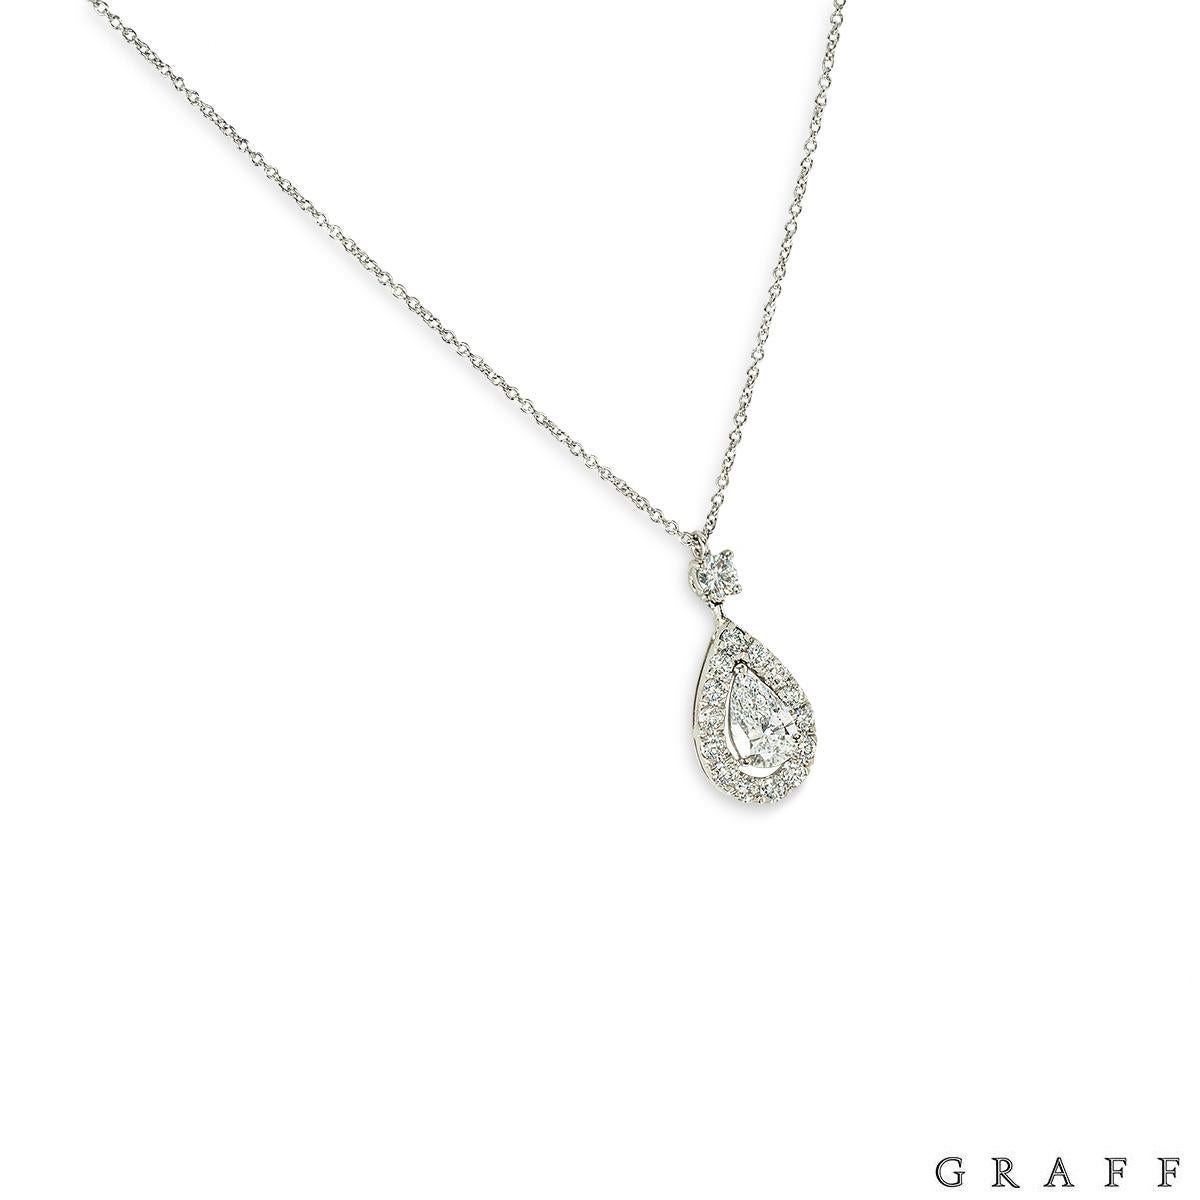 A beautiful platinum diamond drop pendant by Graff. The pendant starts with a 0.15ct round brilliant cut diamond in a 4 prong setting, followed by a pear cut diamond with a weight of 0.70ct, D in clour and IF clarity. This spectacular pear cut is